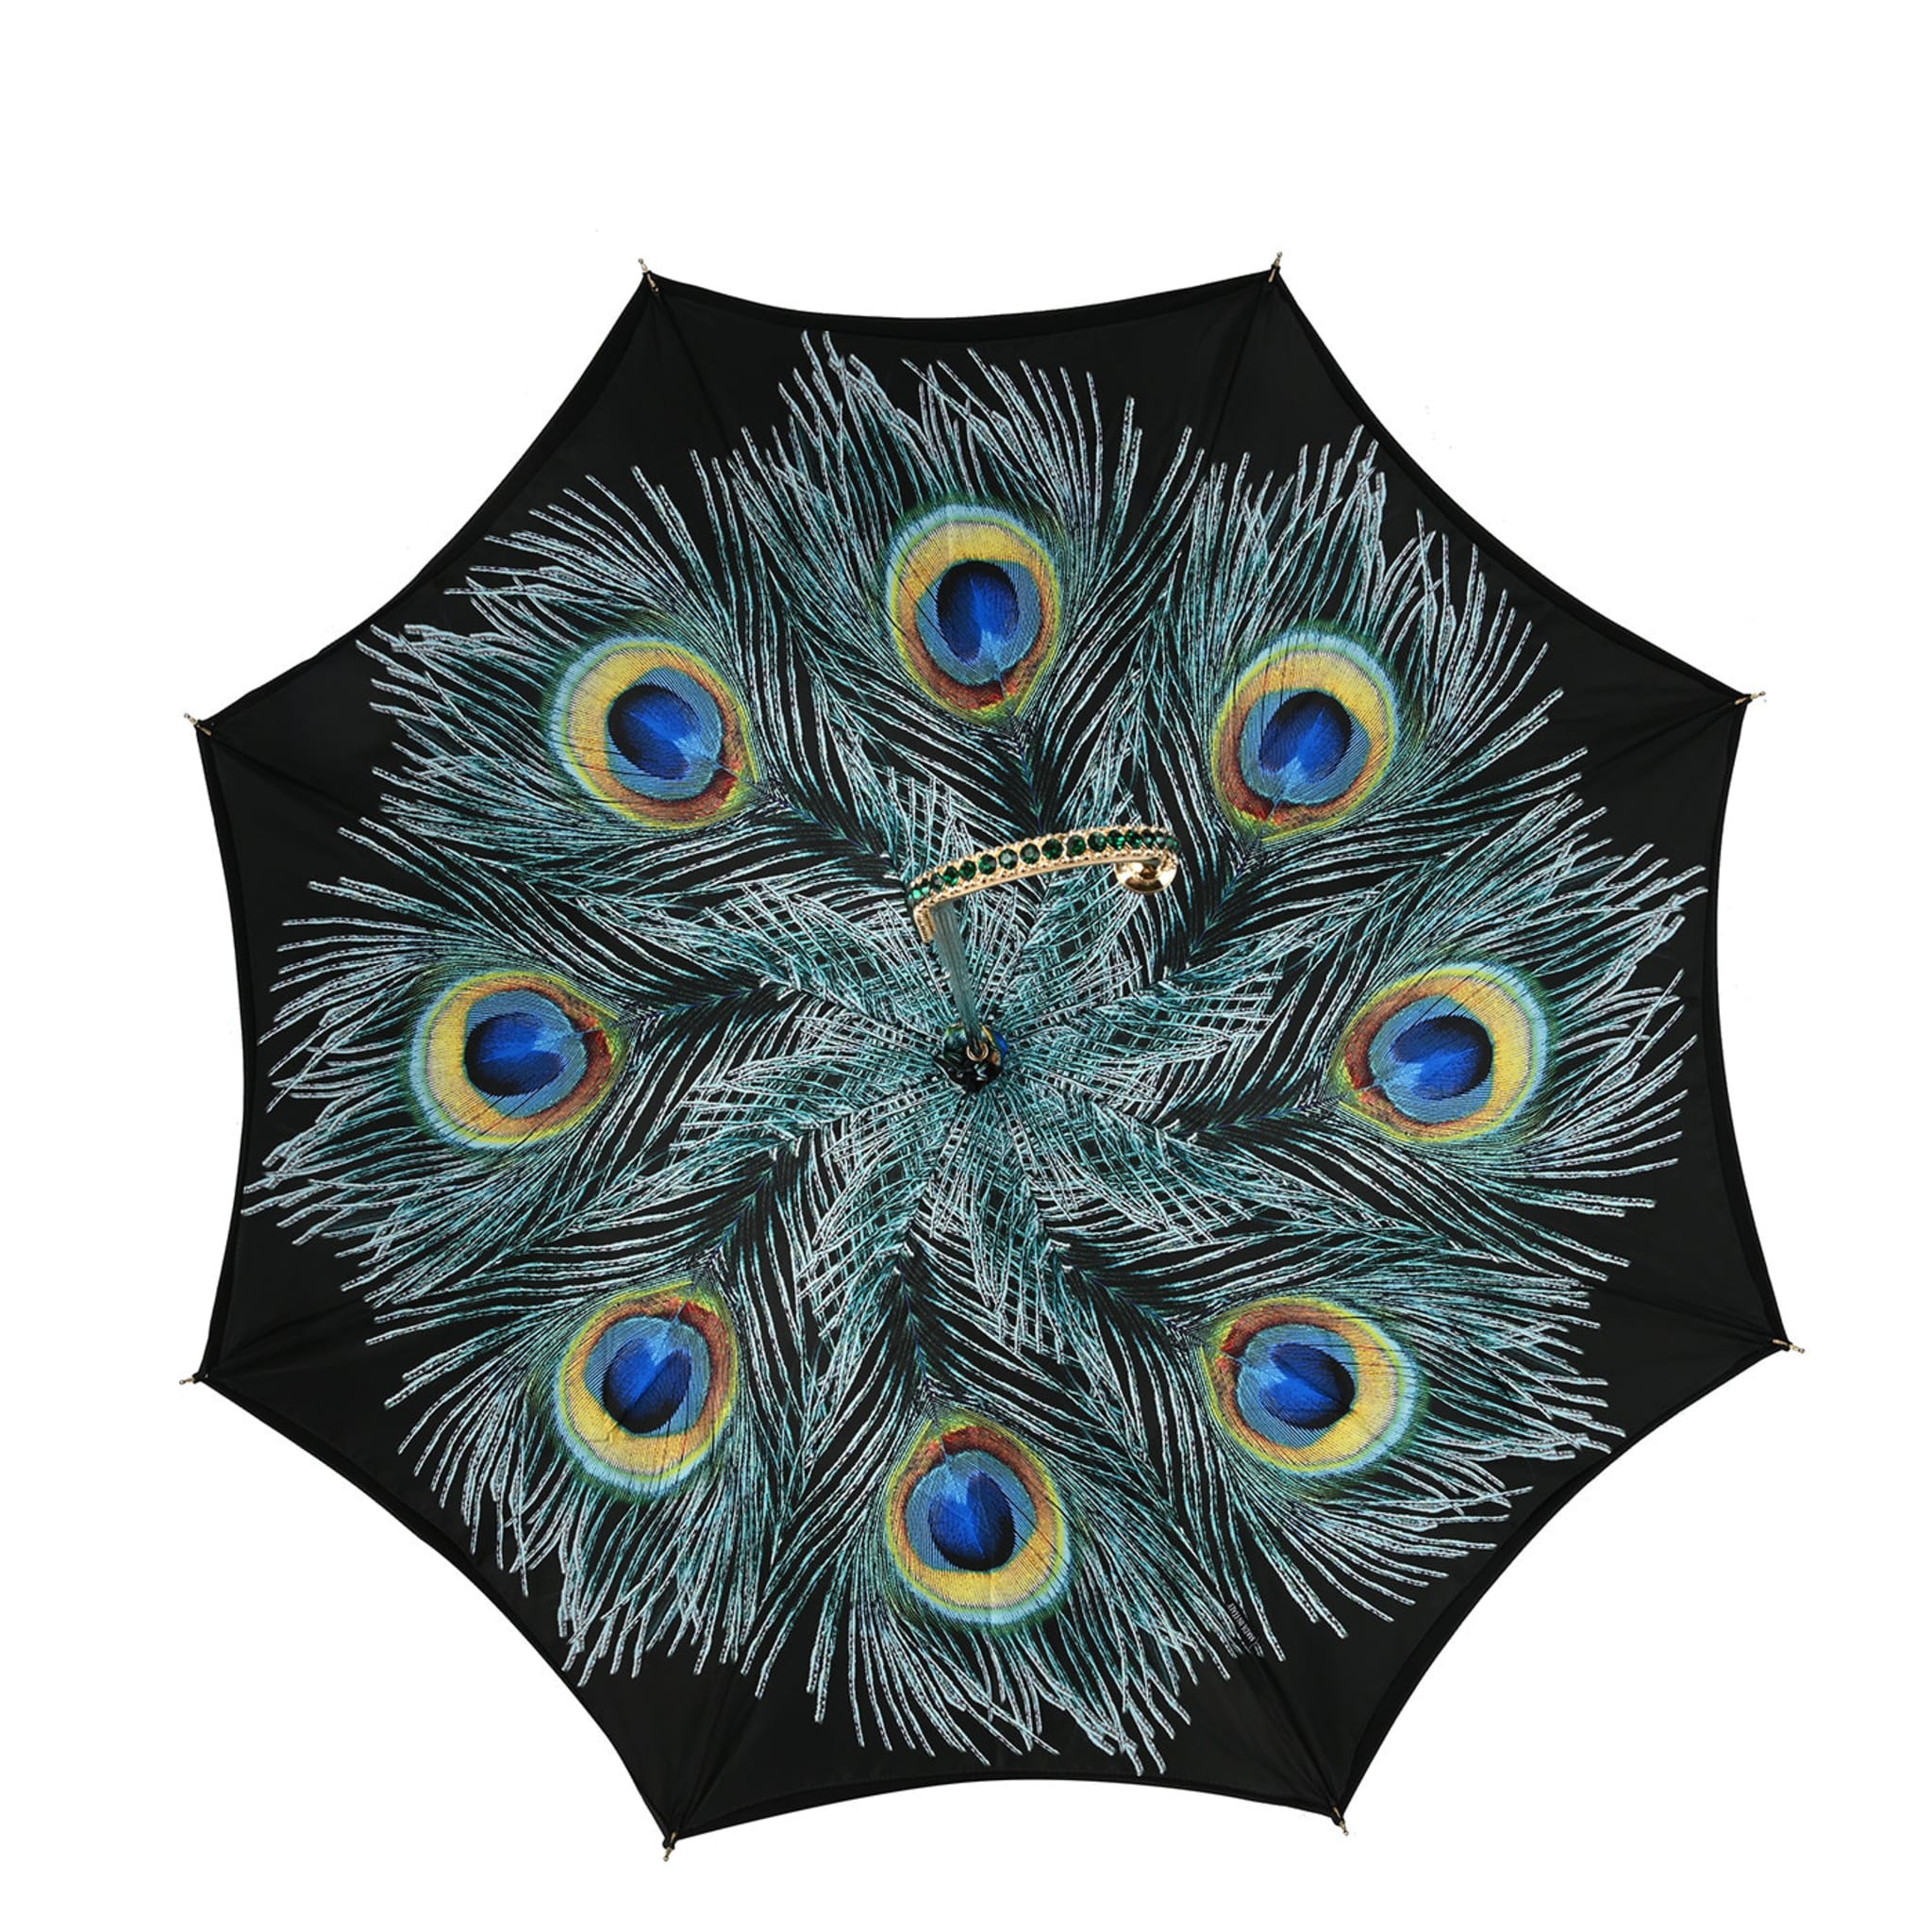 Black Peacock Leaves Umbrella with Jeweled Handle - Alternative view 2